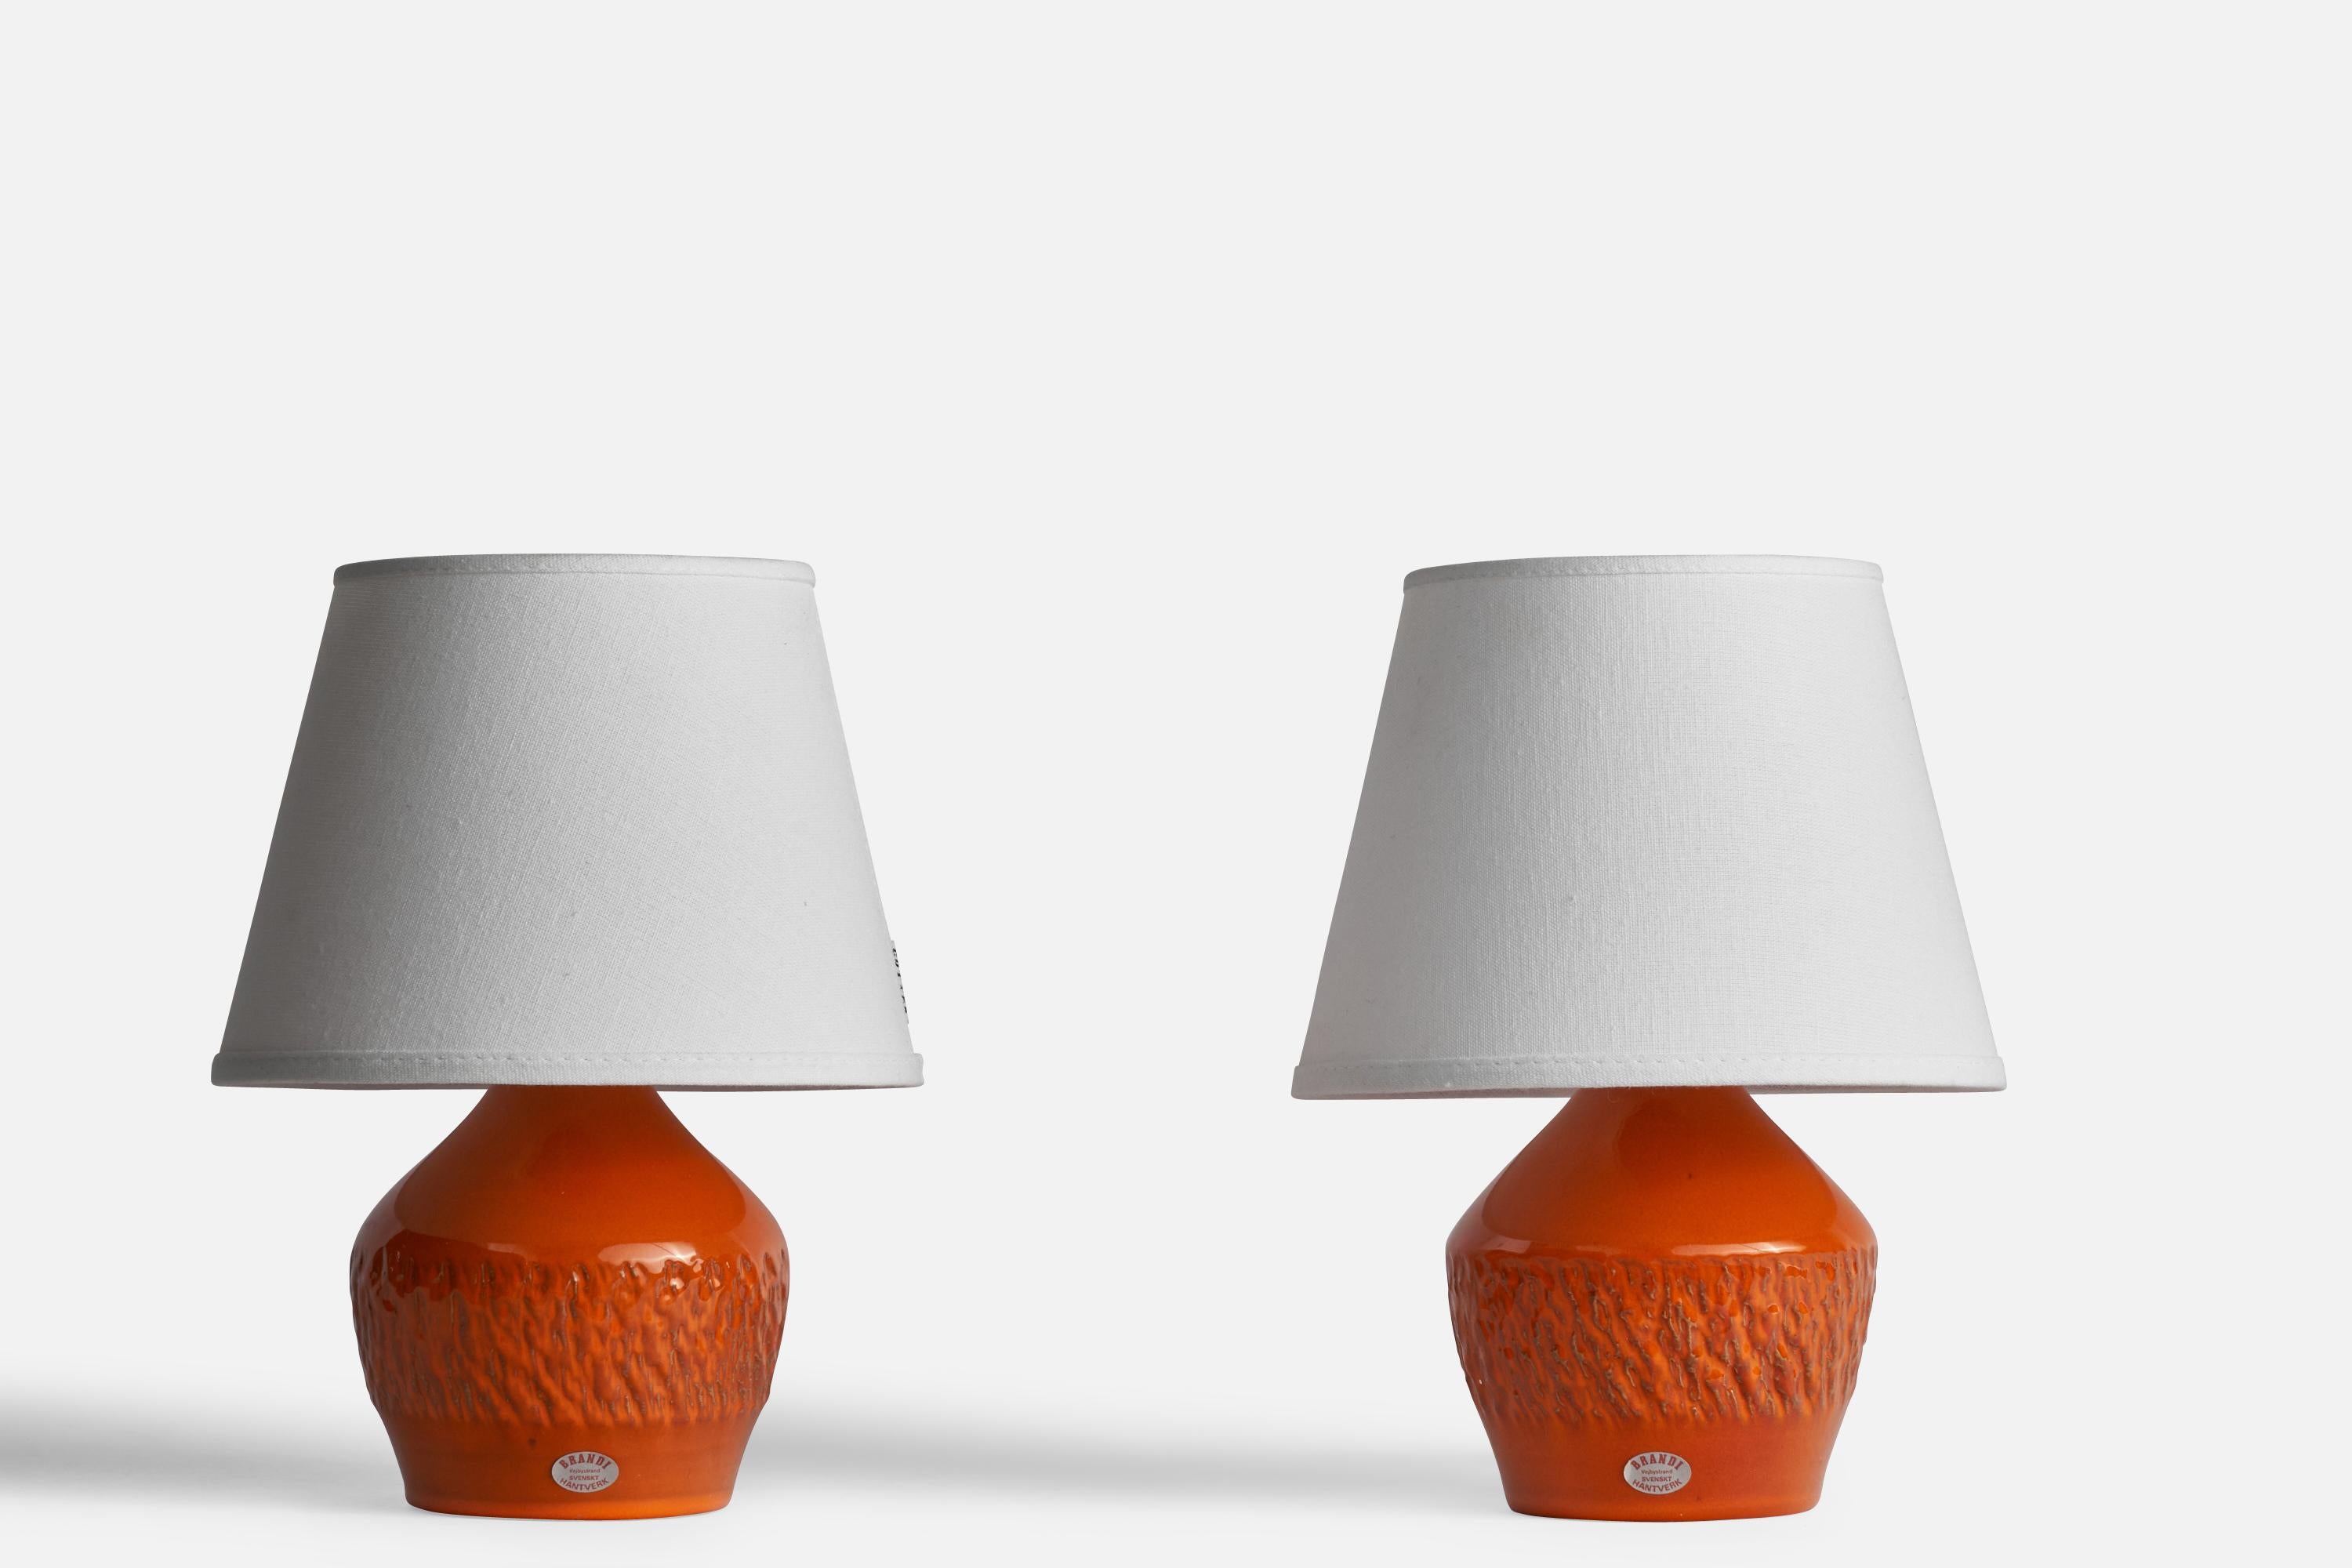 A pair of orange-glazed and incised table lamps designed and produced by Henry Brandi, Vejbystrand, Sweden, c. 1960s.

Dimensions of Lamp (inches): 8.1” H x 4.75” Diameter
Dimensions of Shade (inches): 5.25” Top Diameter x 8” Bottom Diameter x 6”